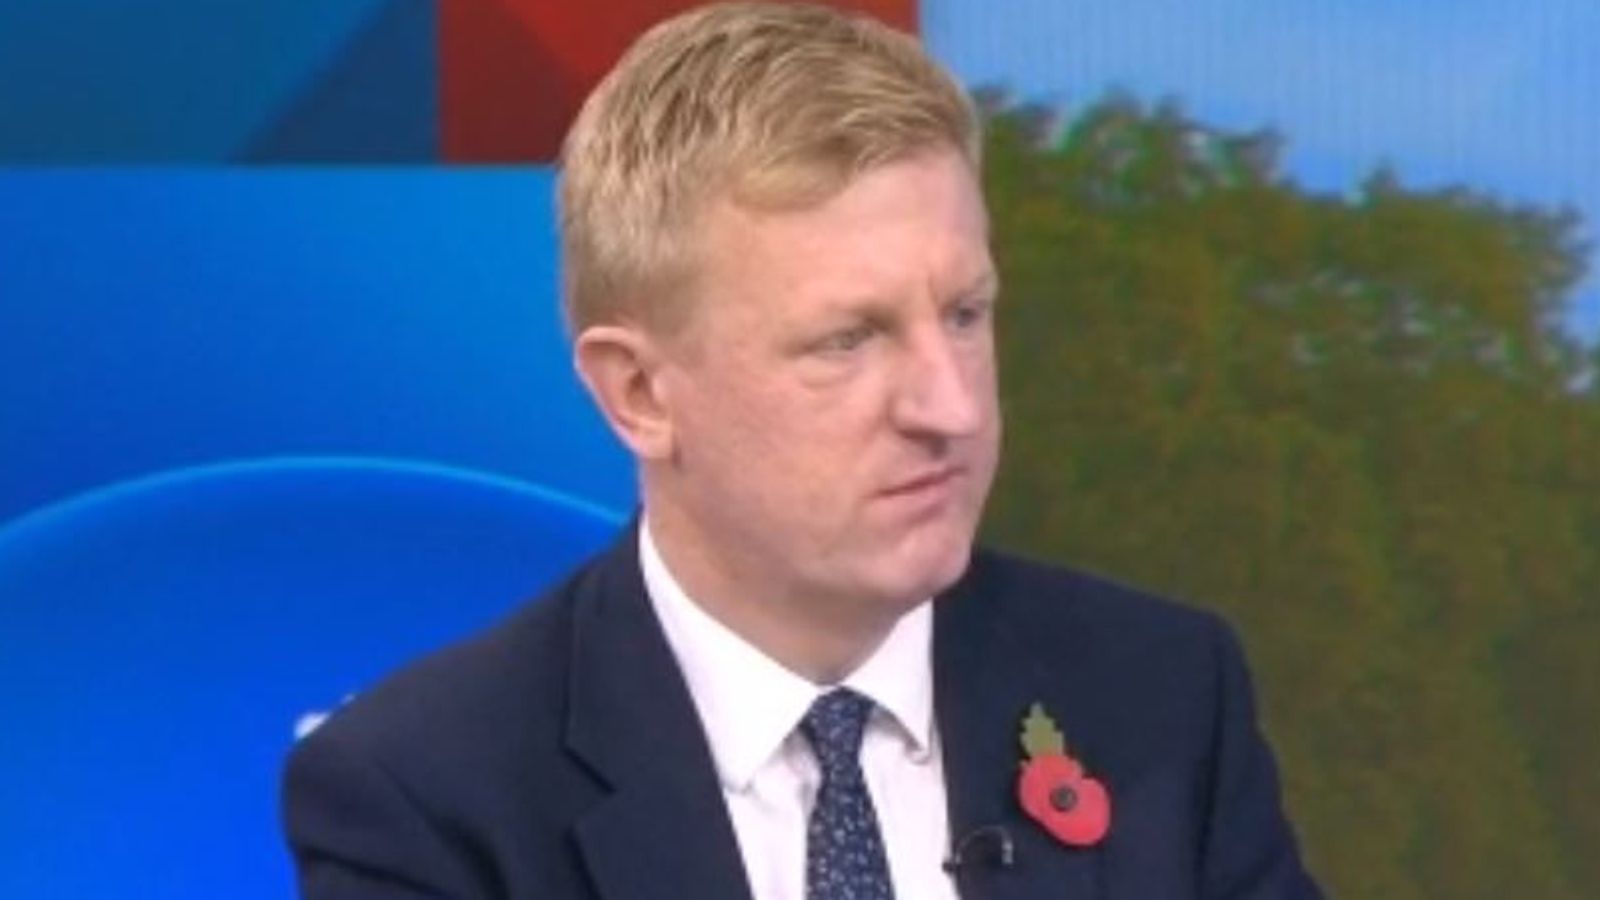 Tories have 'zero tolerance' for sexual misconduct, says Oliver Dowden in face of rape cover-up claims